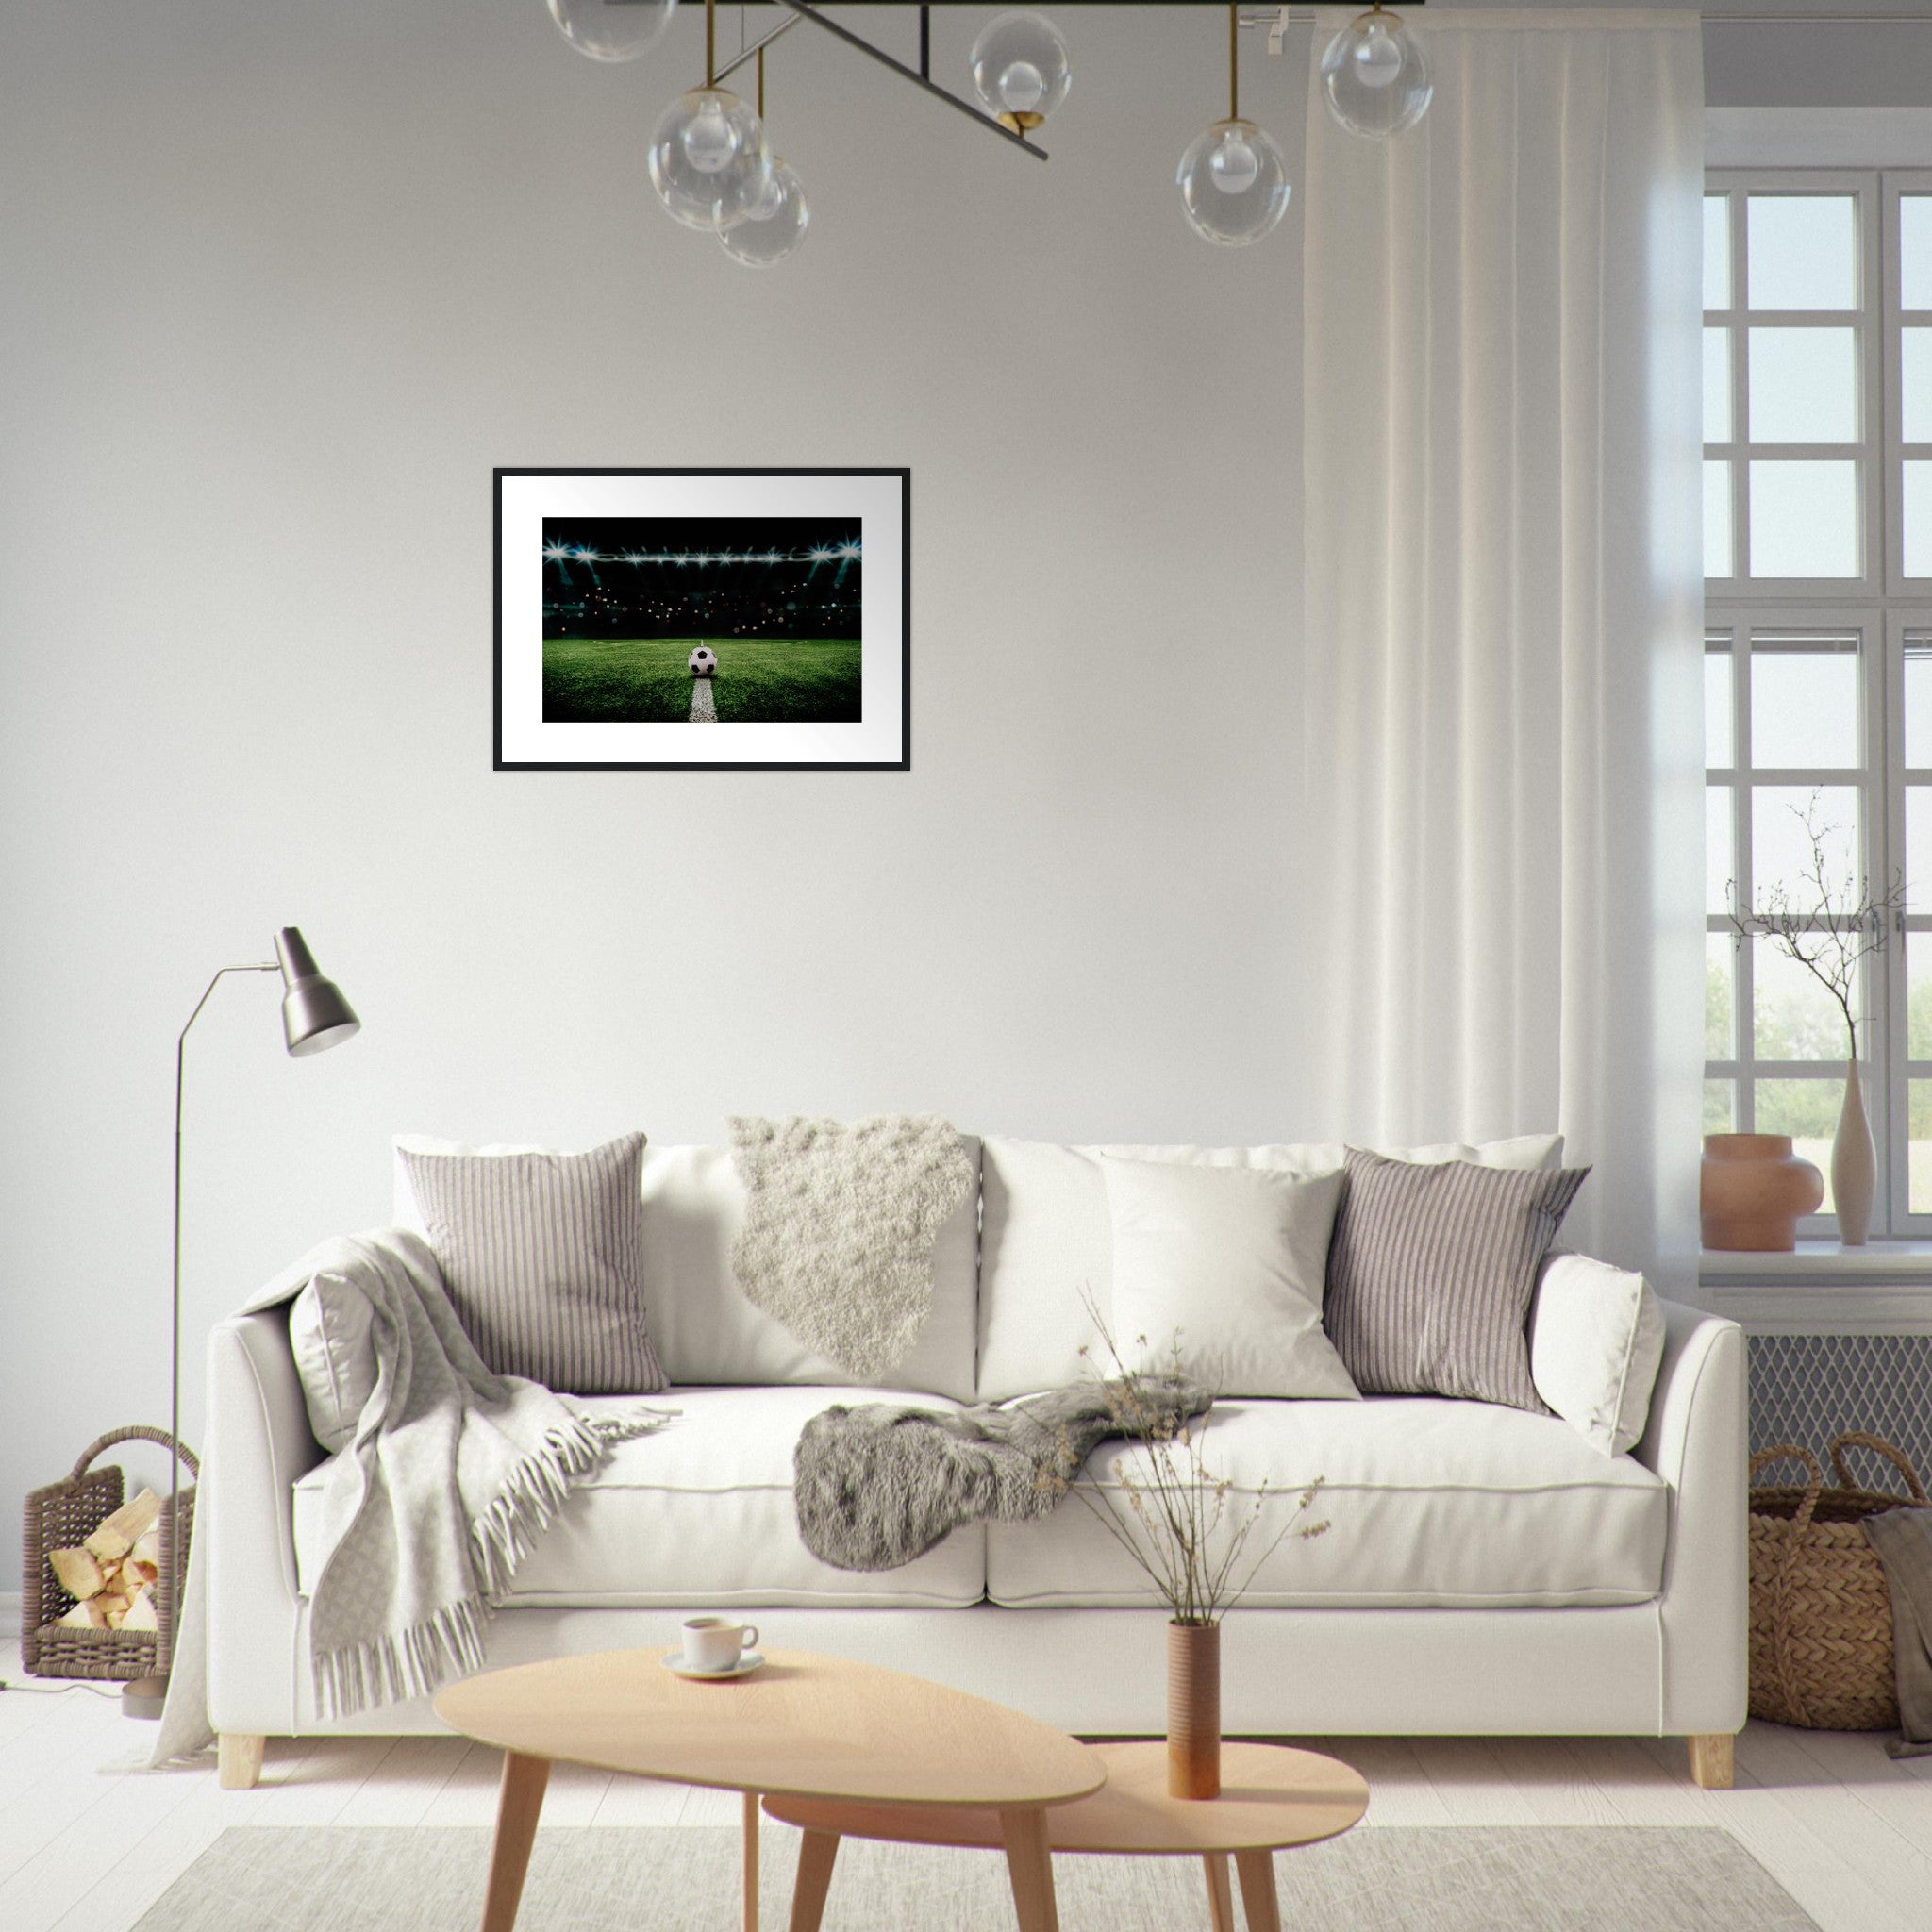 View Of Soccer Ball On Athletic Field Poster